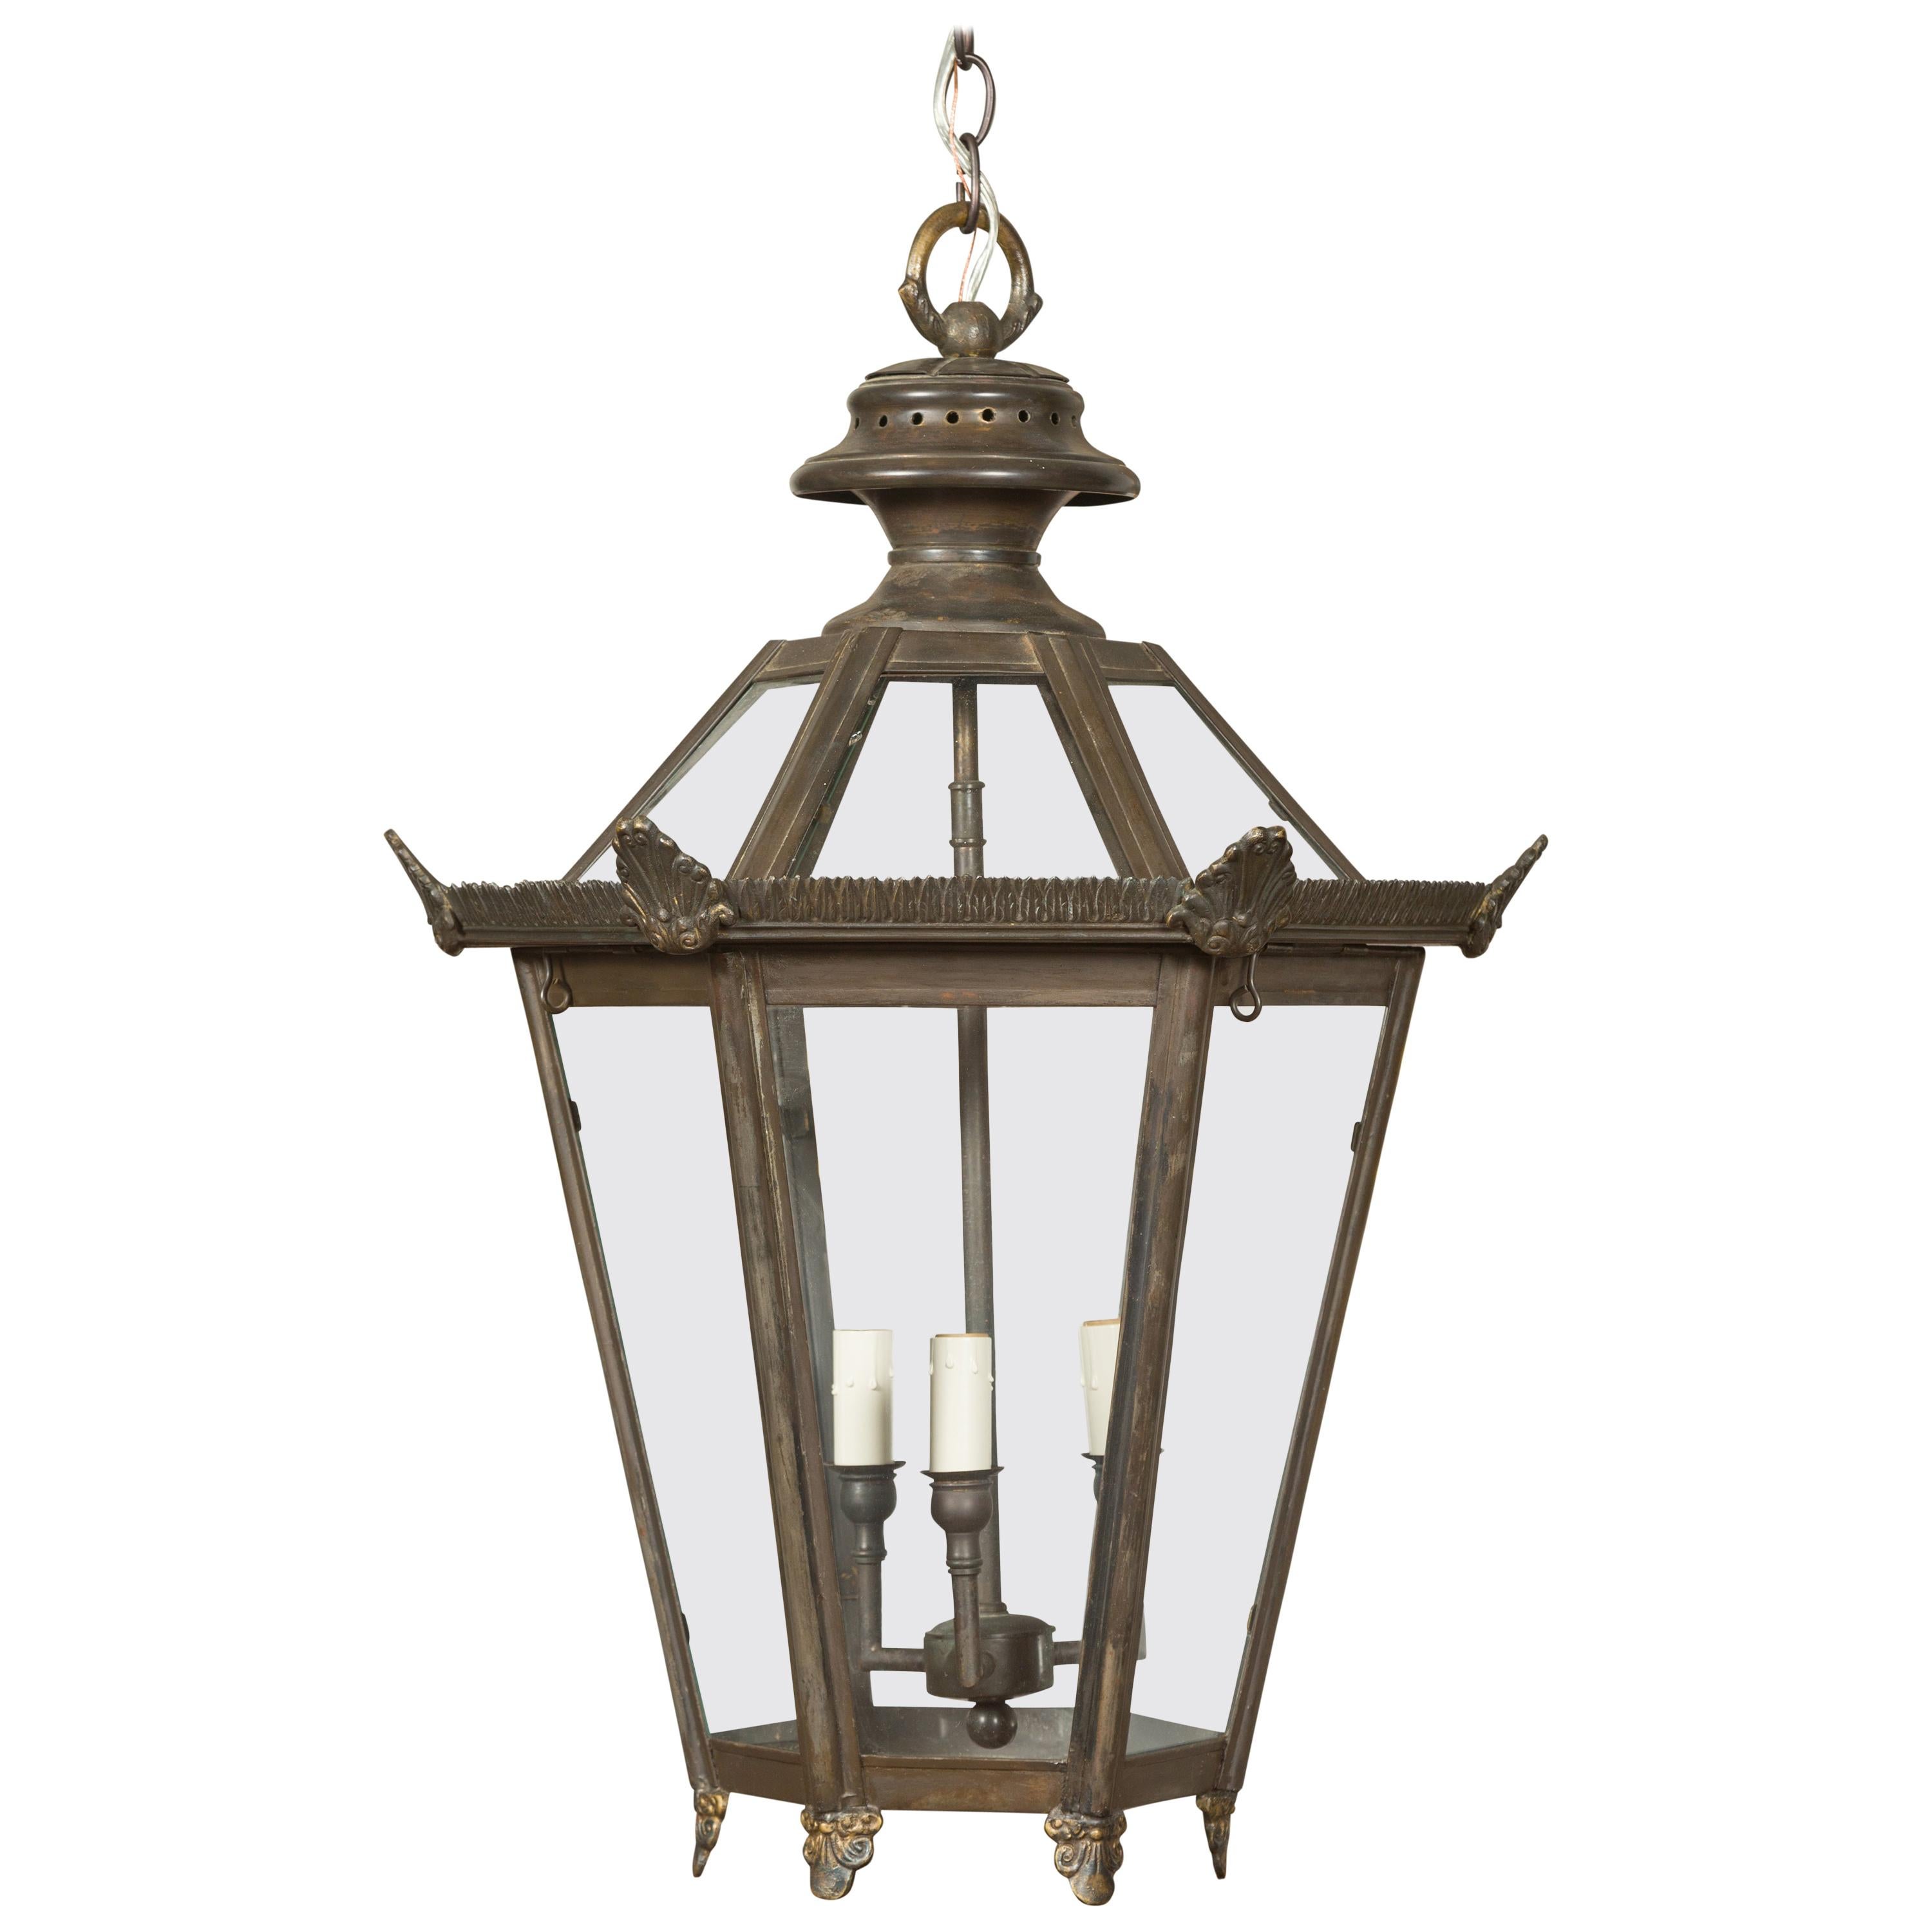 English 1920s Three-Light Wired Bronze Lantern with Palmettes and Glass Panels